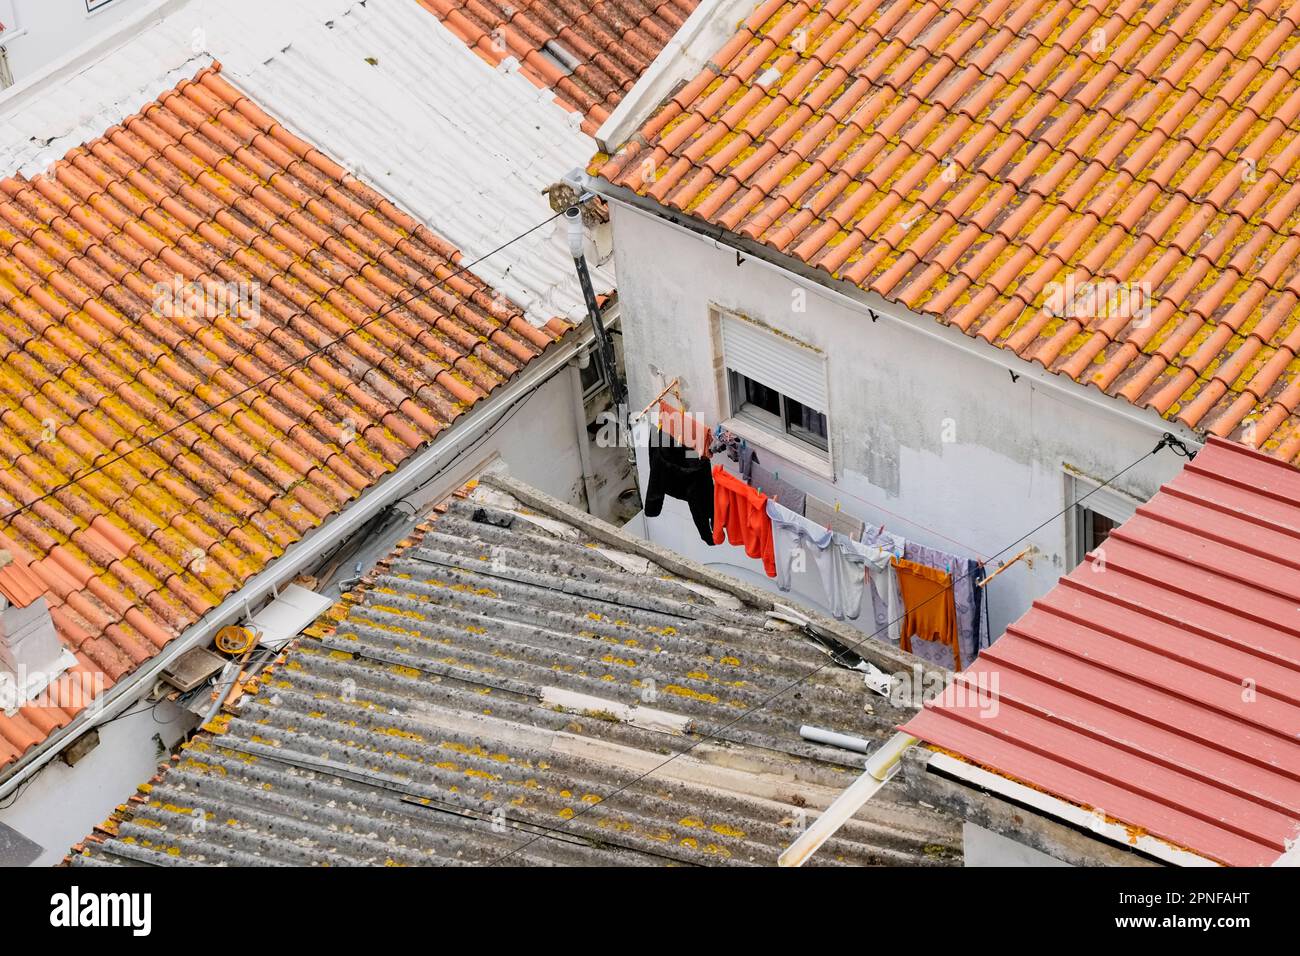 Portugal, Lisbon, Tile rooftops and hanging laundry Stock Photo